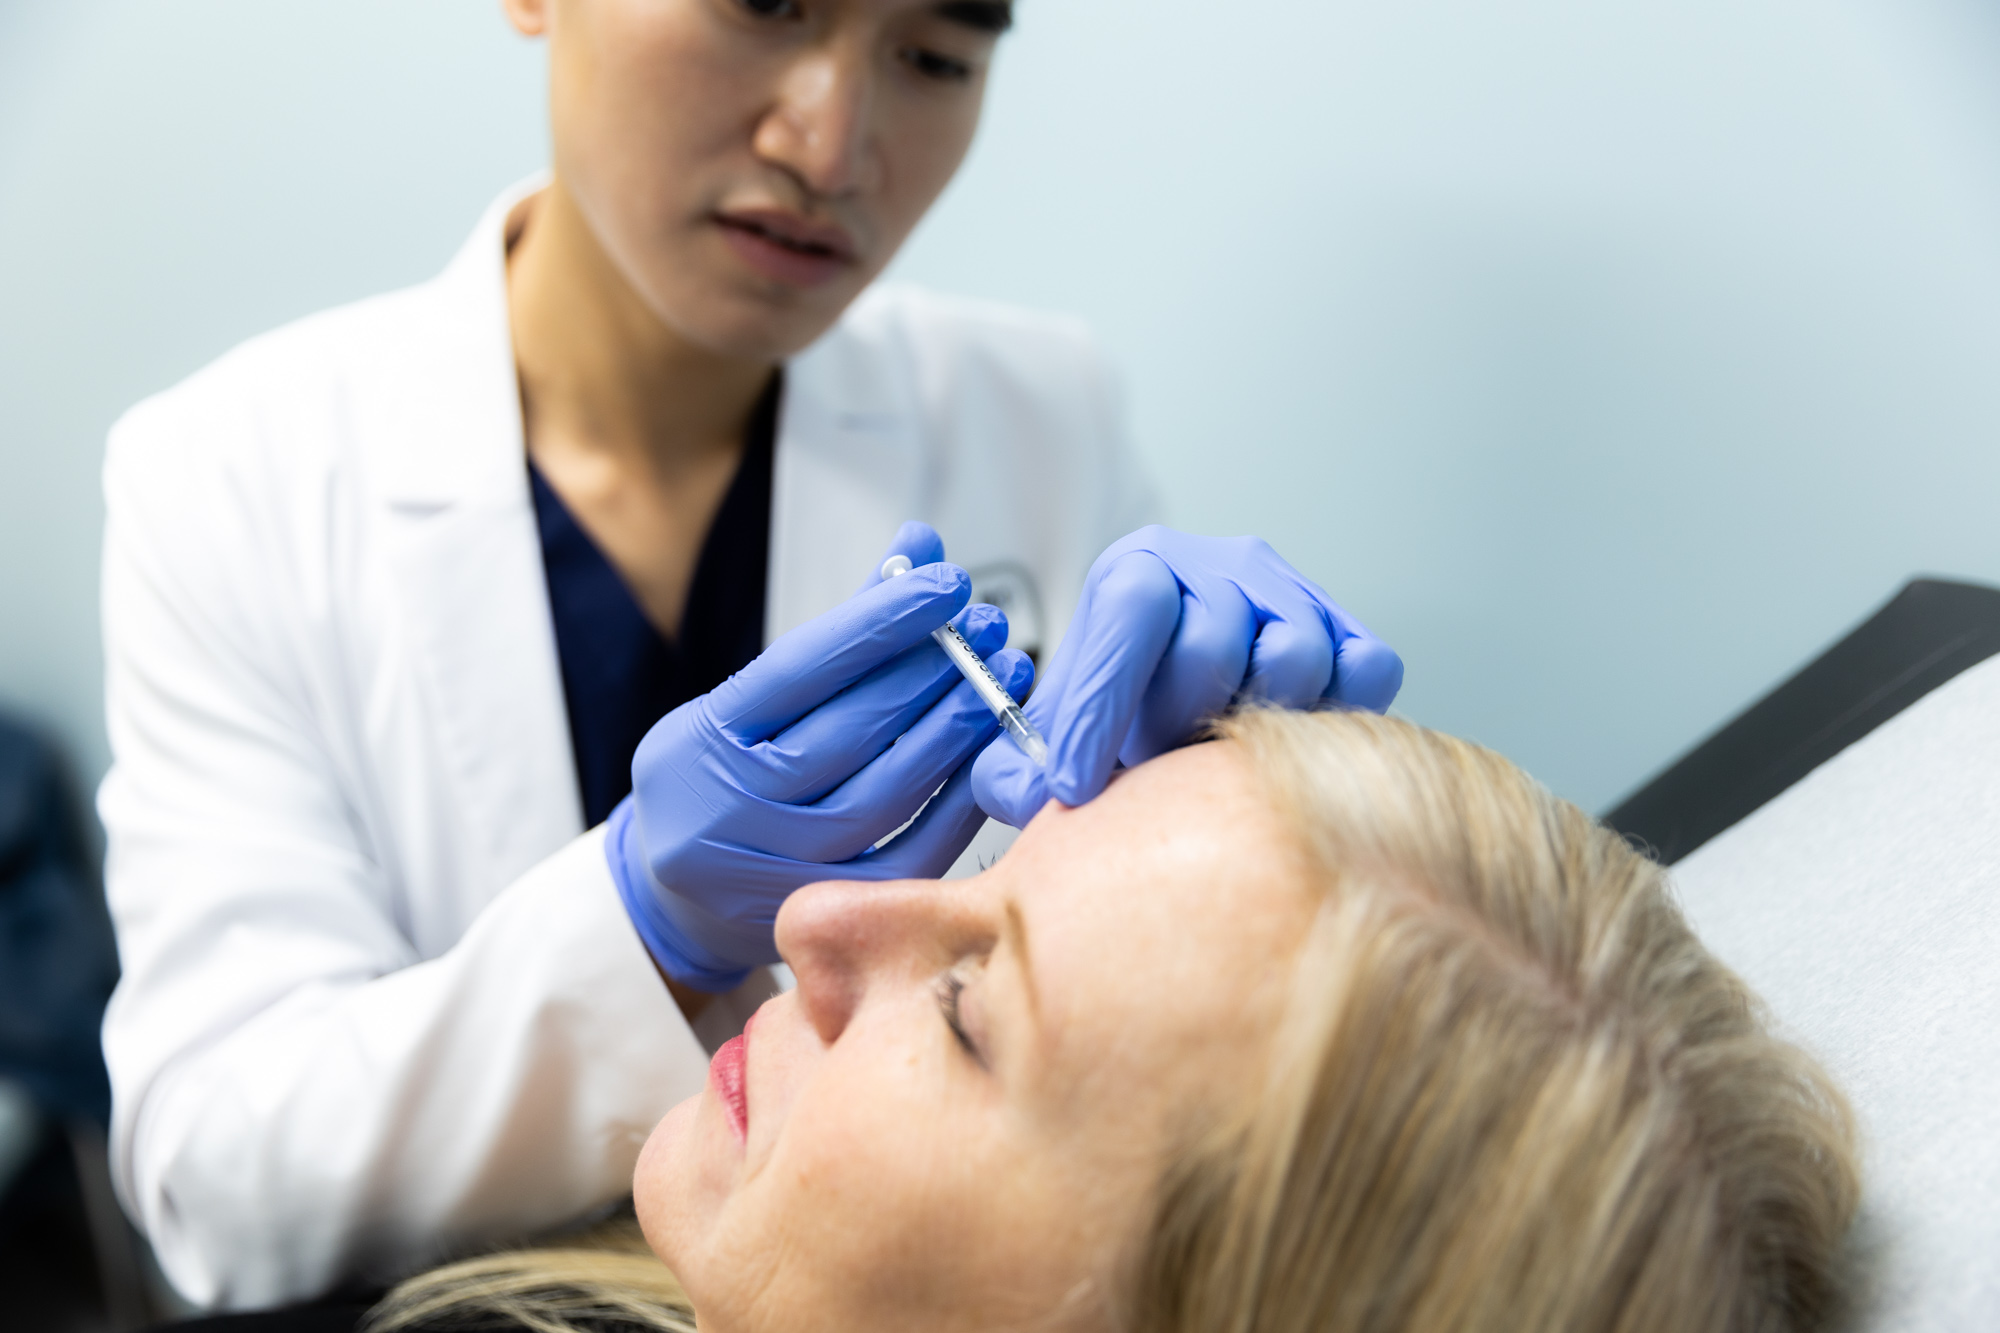 A Kansas City Skin and Cancer Center doctor administers an injectable treatment for female patient. He holds the shot up to her forehead, and her eyes are closed.